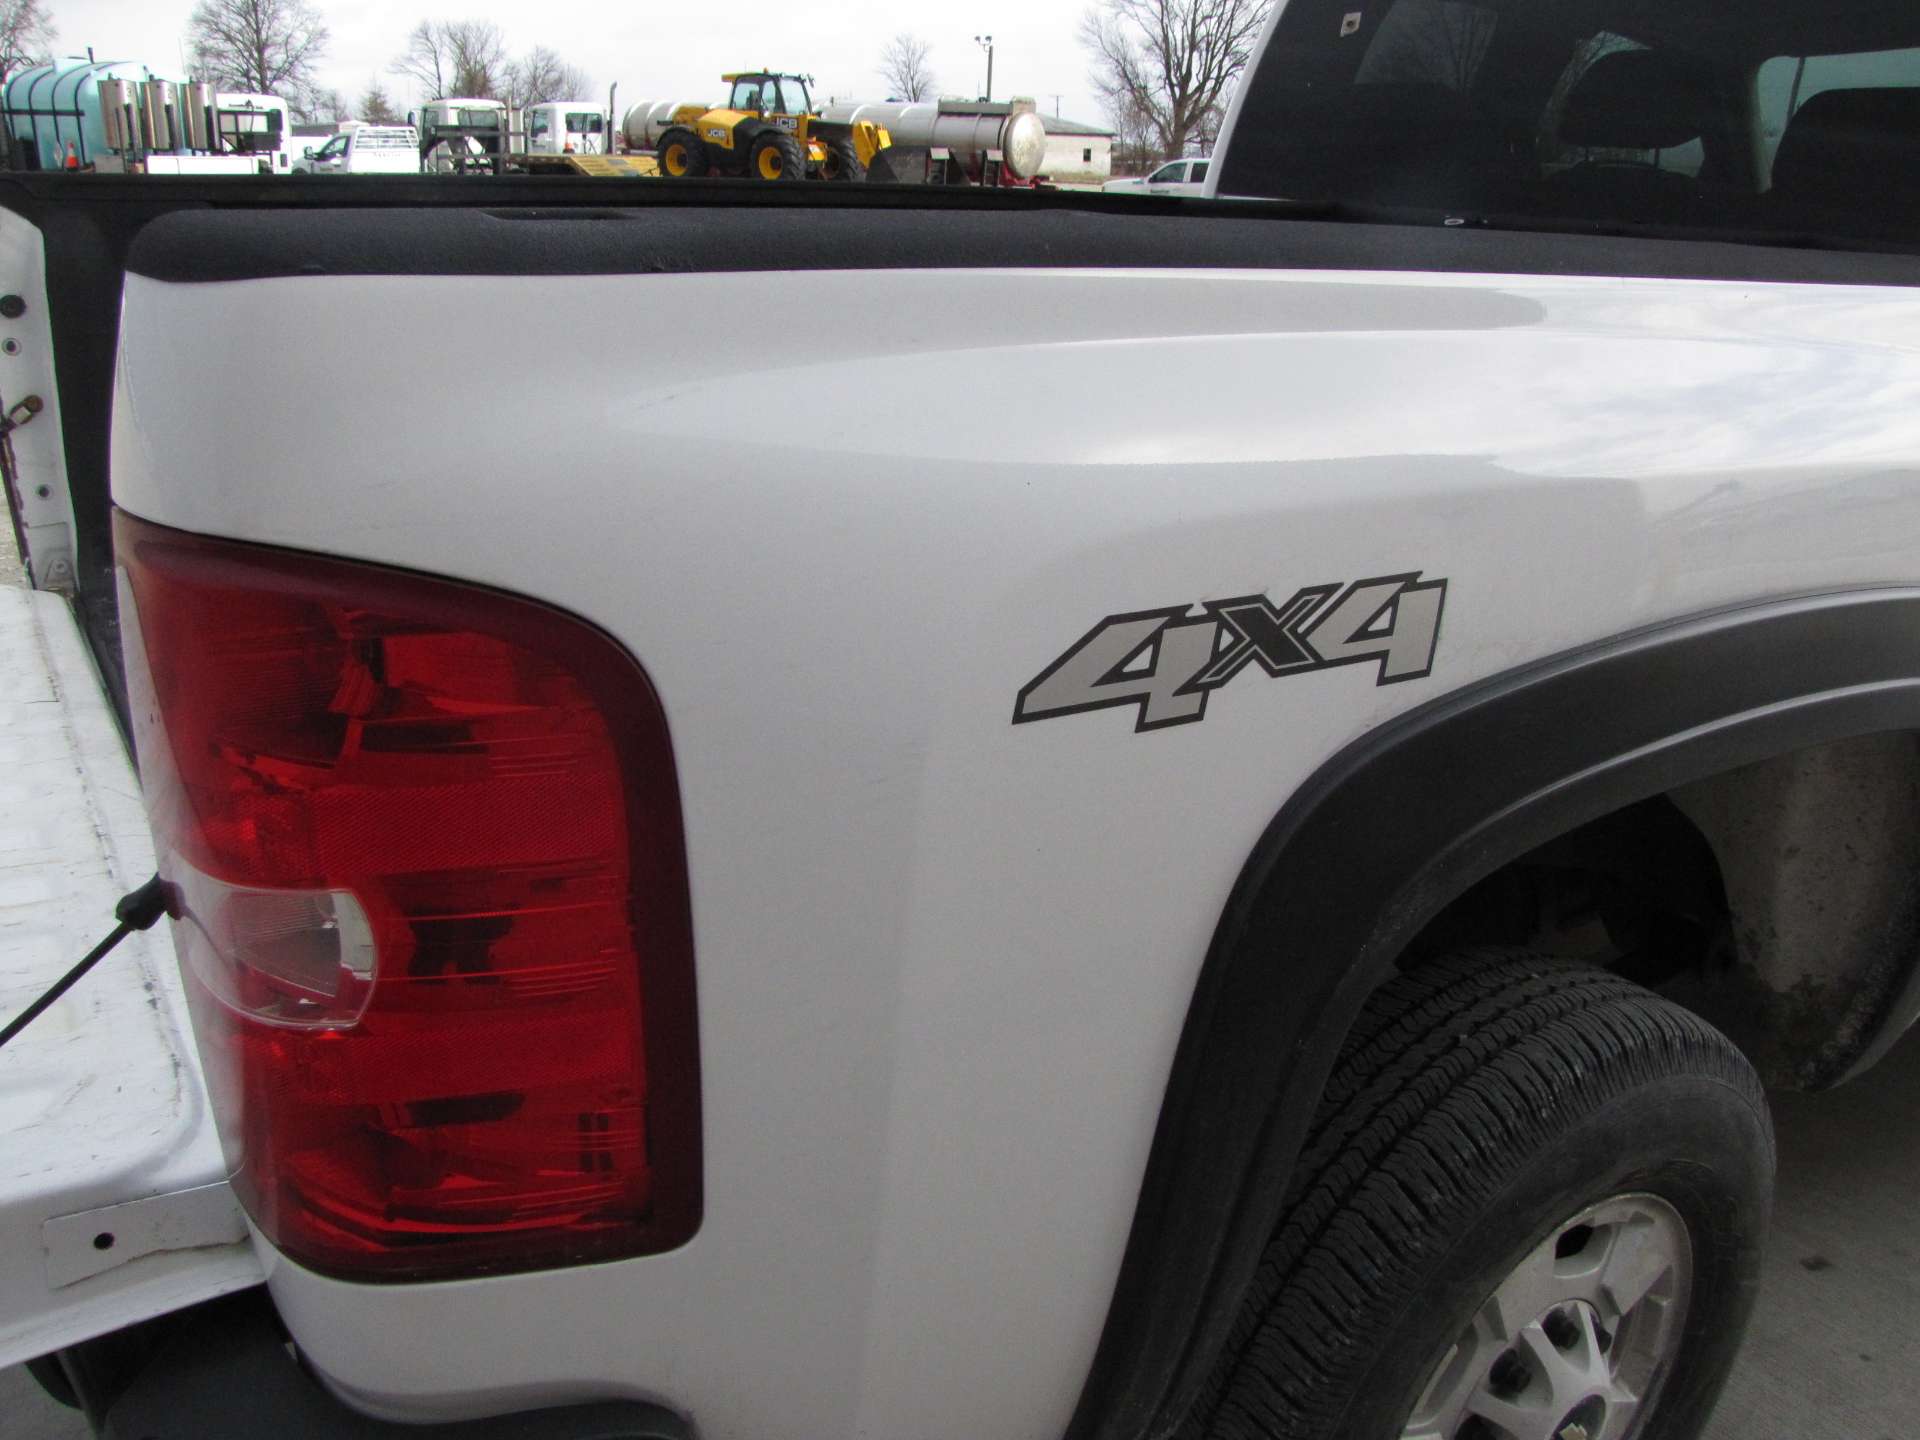 2012 Chevy 2500 HD pickup truck - Image 33 of 57